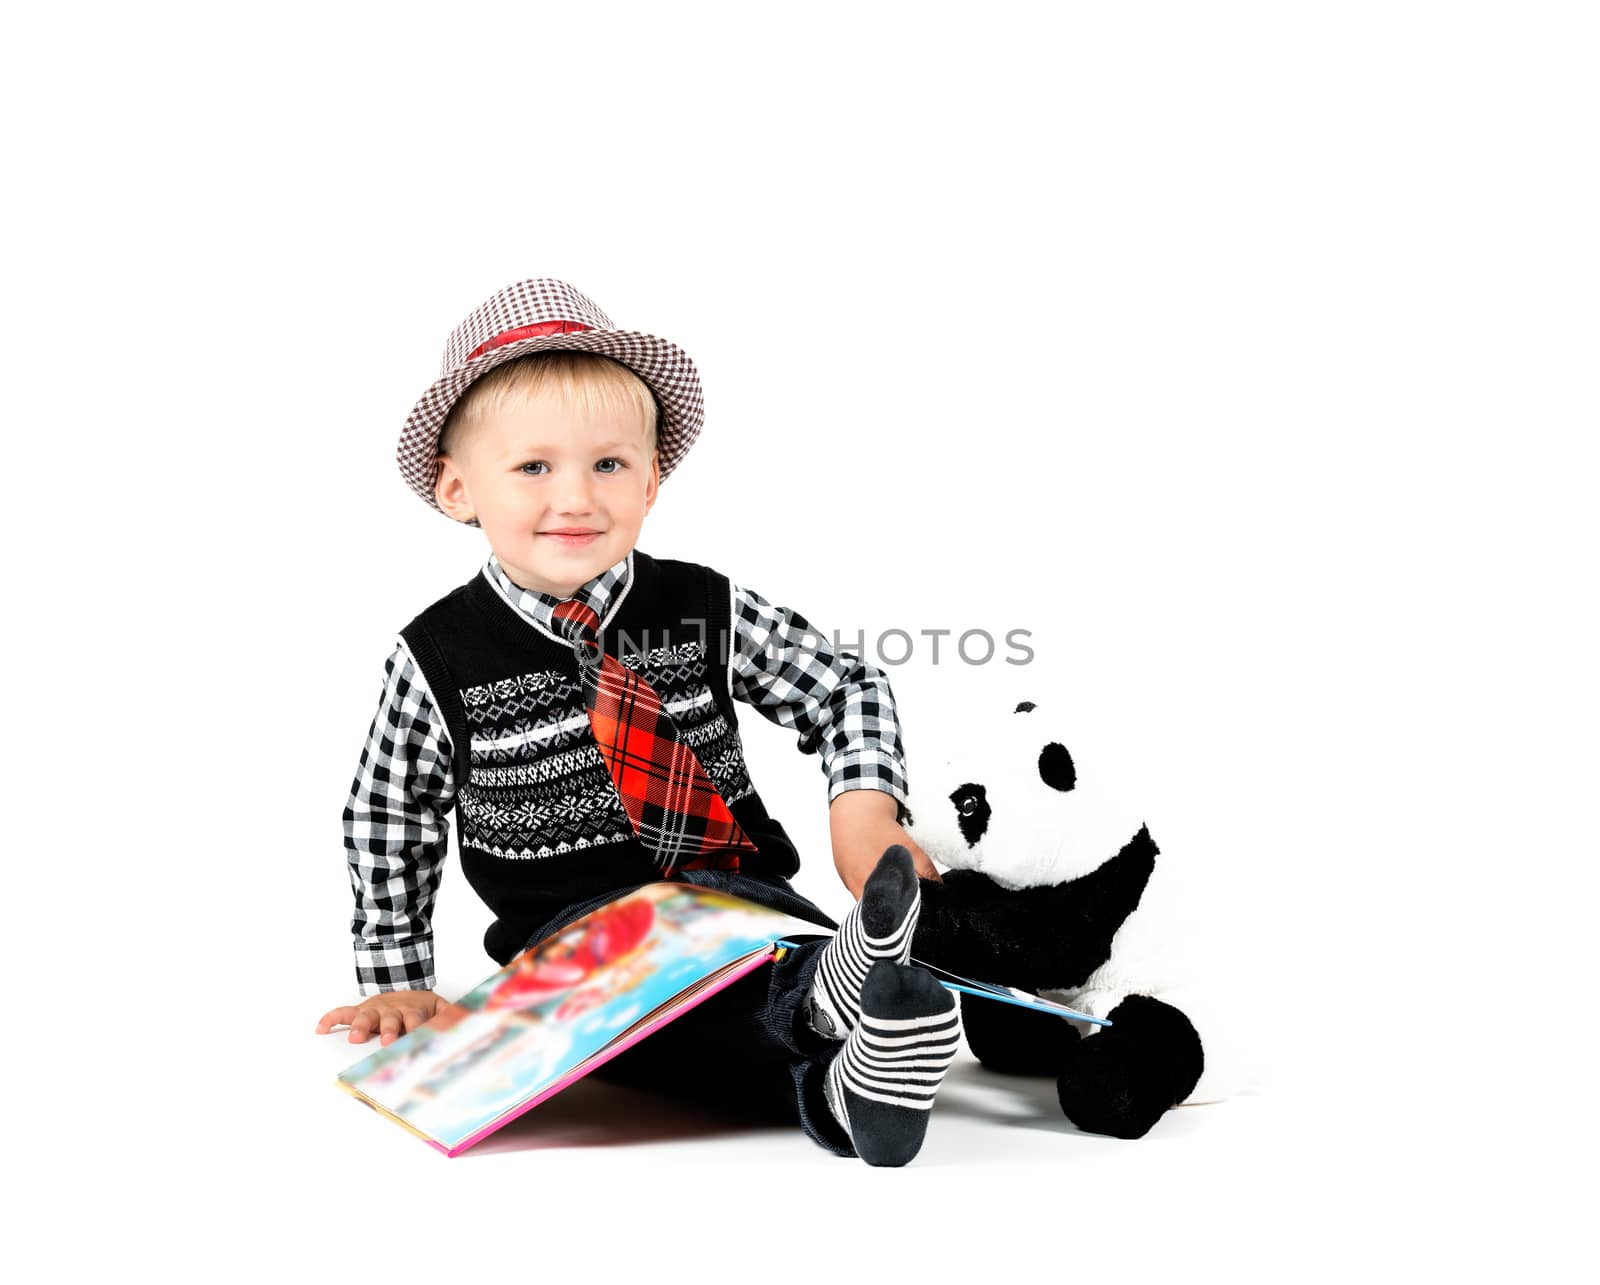 Smiling happy boy with book shot in the studio on a white backgr by Nanisimova